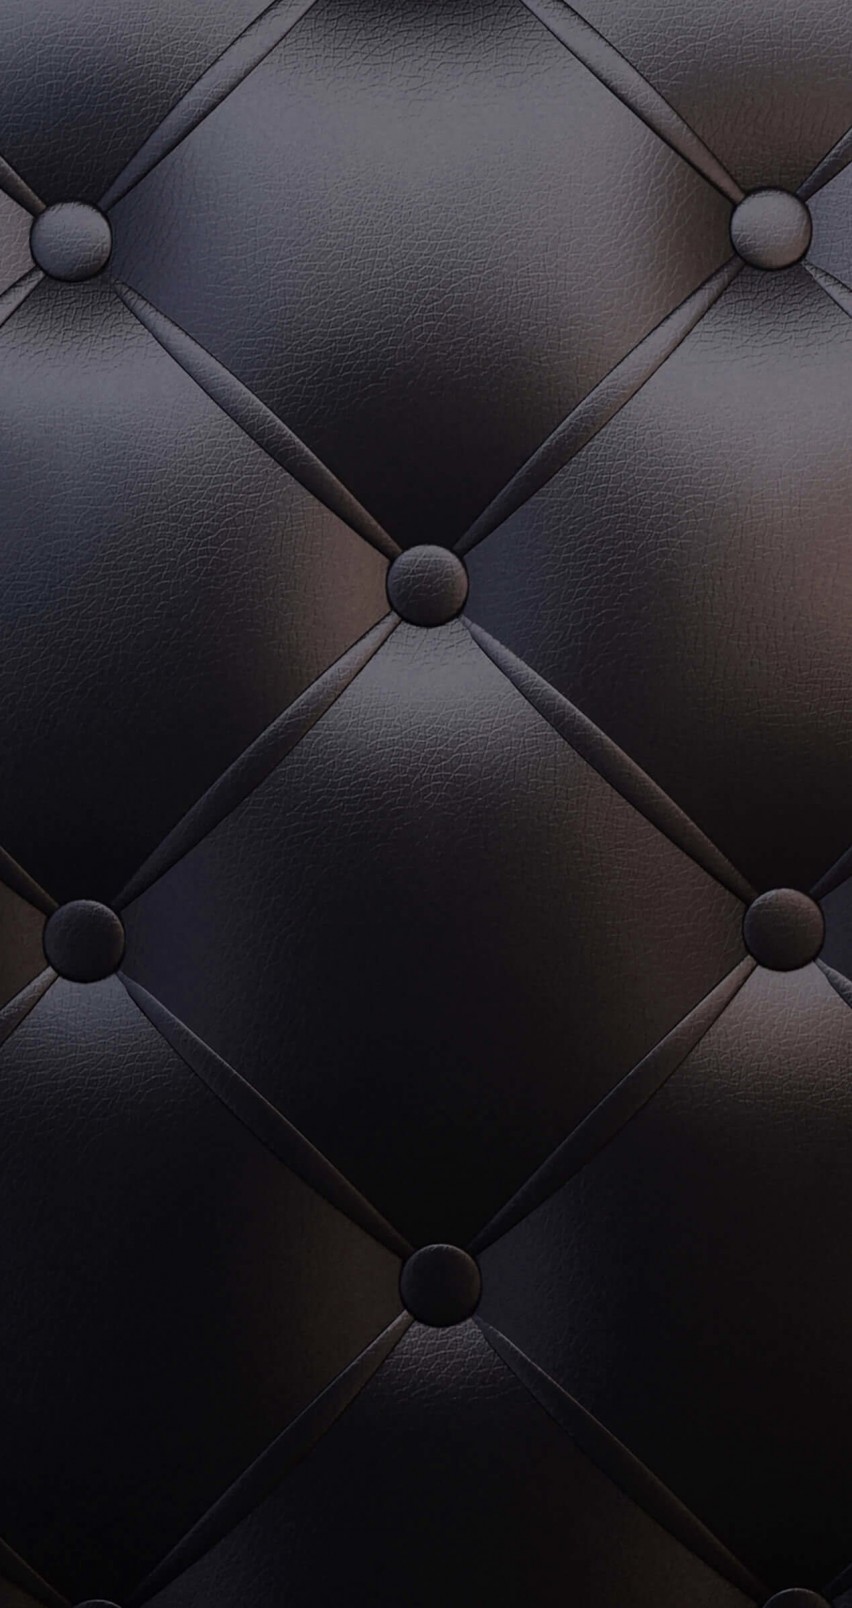 Black Leather Vintage Sofa Wallpaper for Apple iPhone 6 / 6s